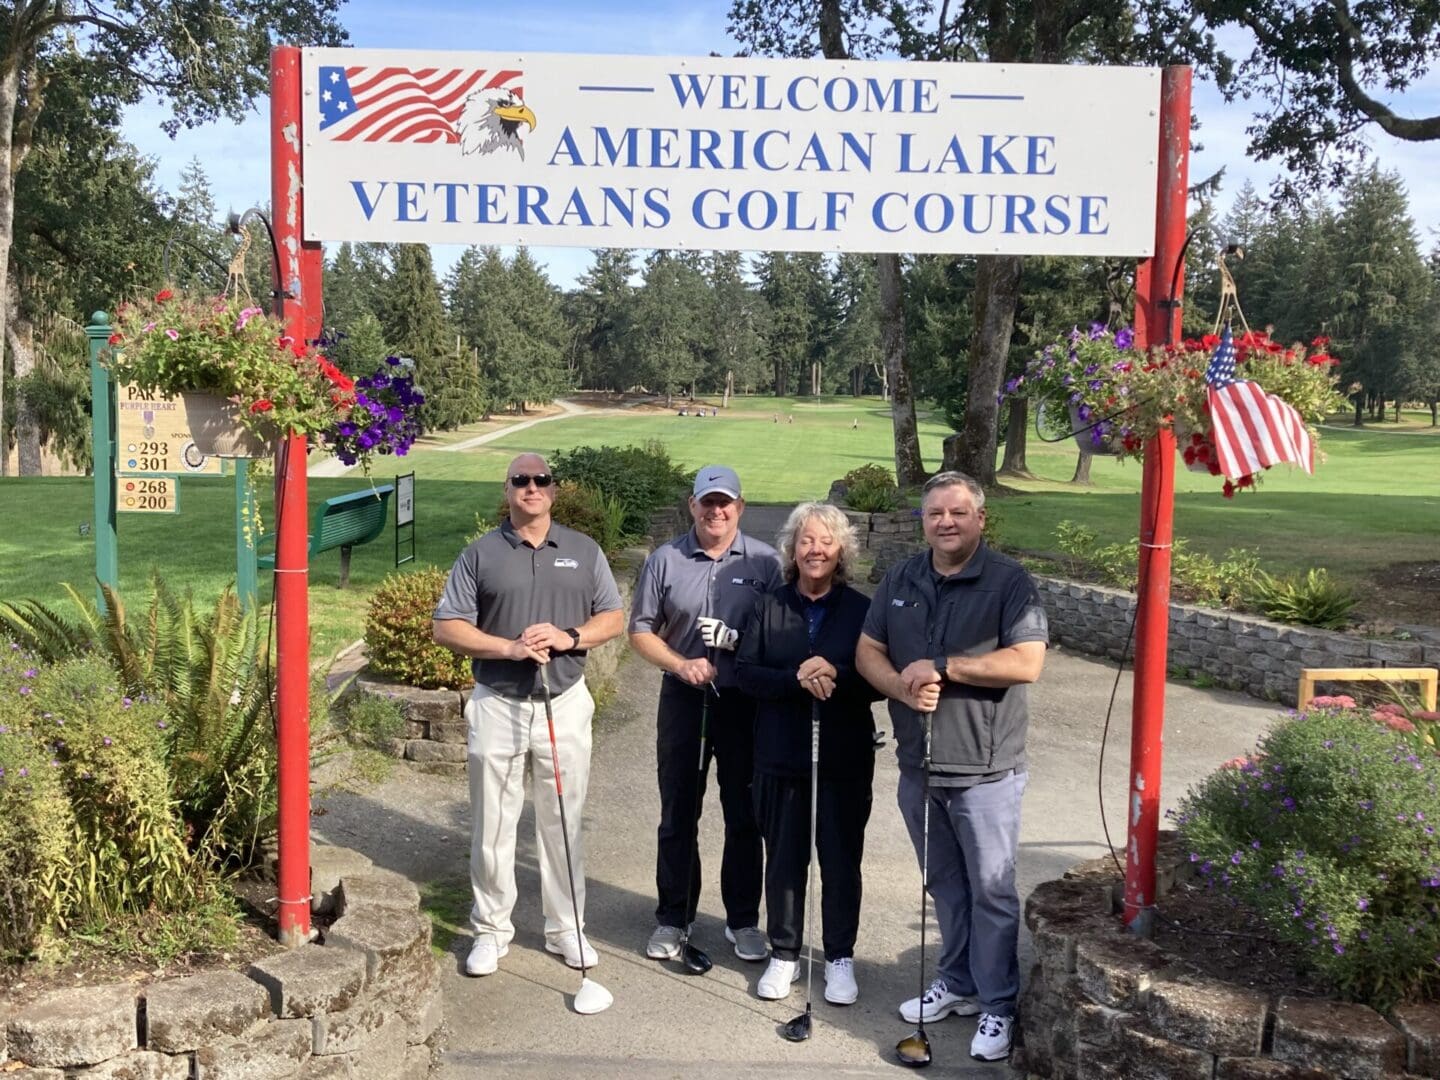 Four people wearing gray uniforms while holding their golf clubs